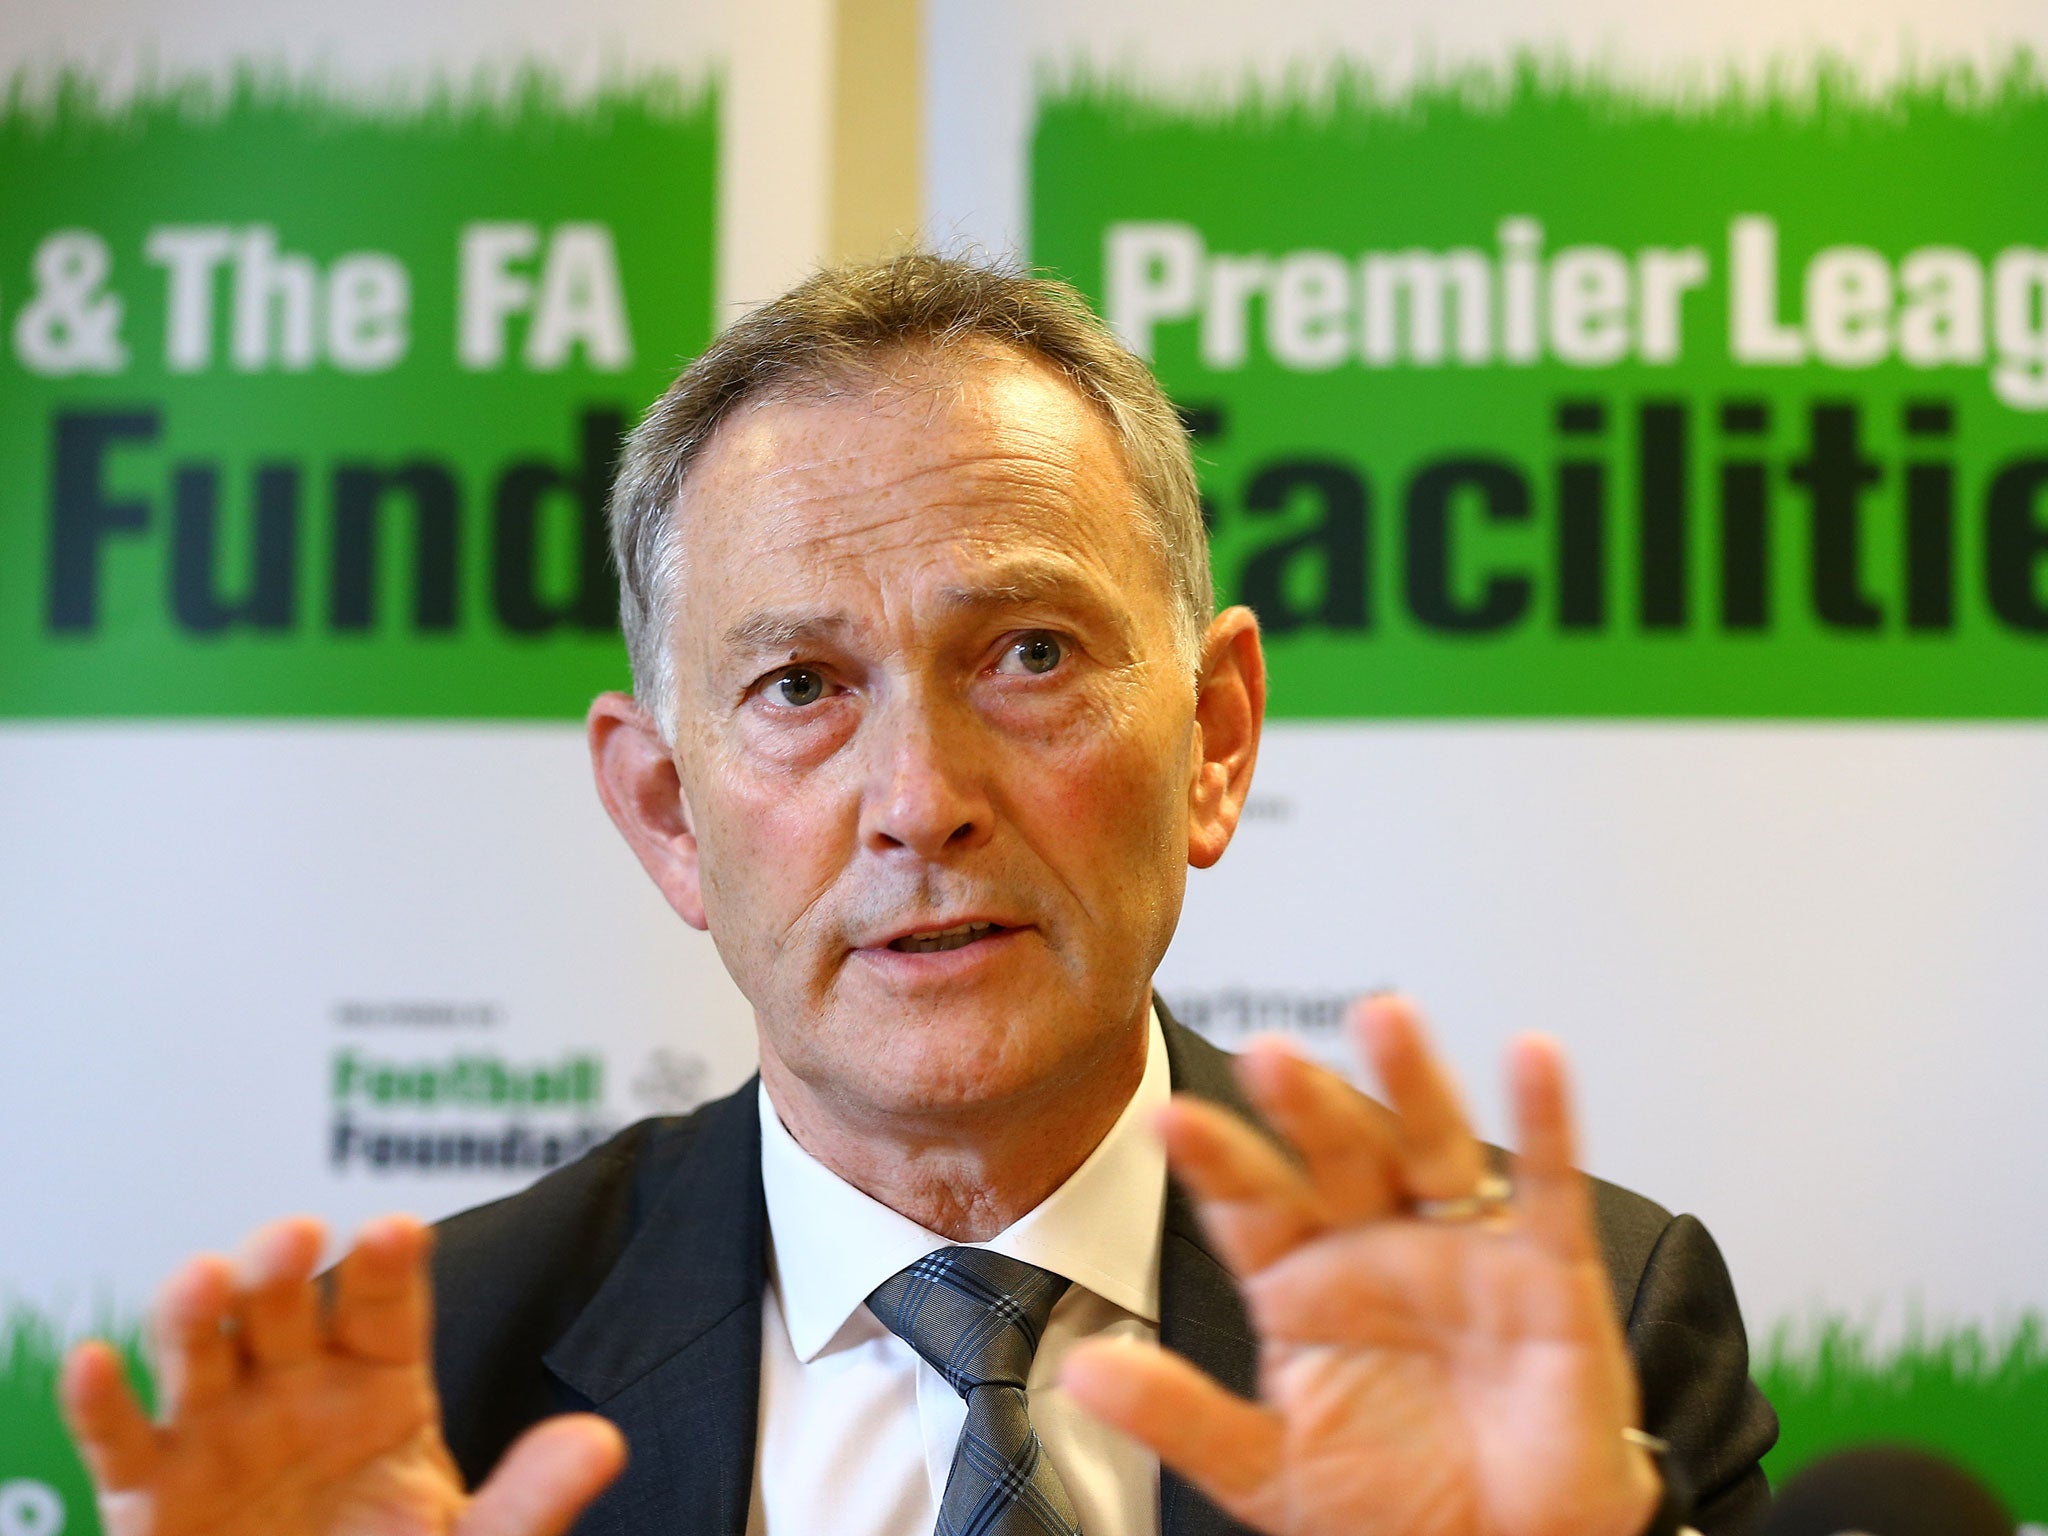 The Premier League boss was revealed to have joked about ‘female irrationality’ in an email